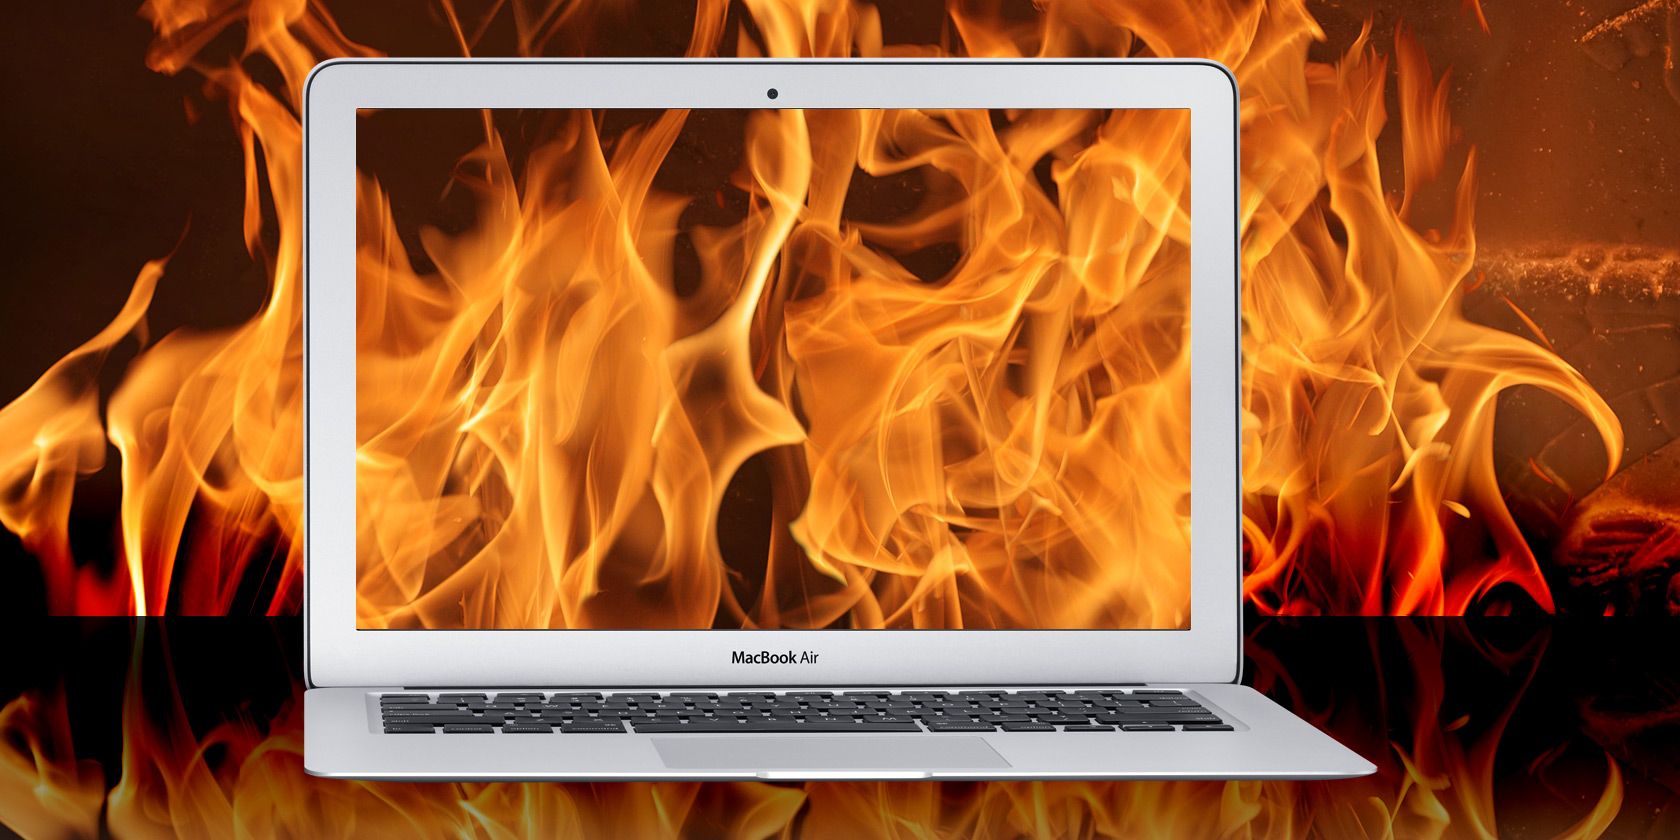 MacBook Air Overheating? 6 Tips and Tricks to Cool It Down